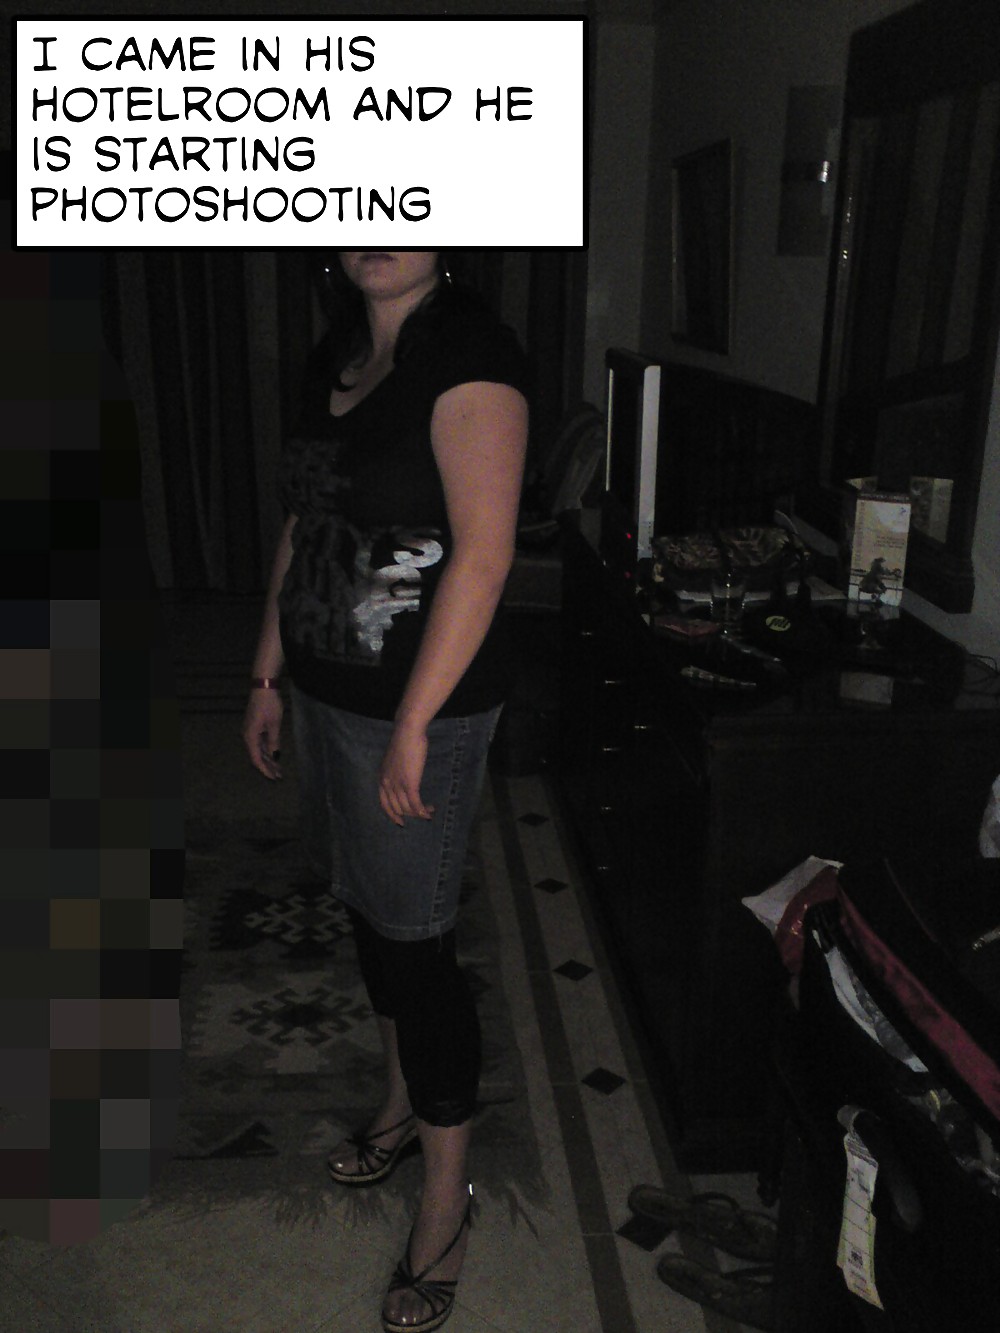 My photostrip story-hubby doesn't know